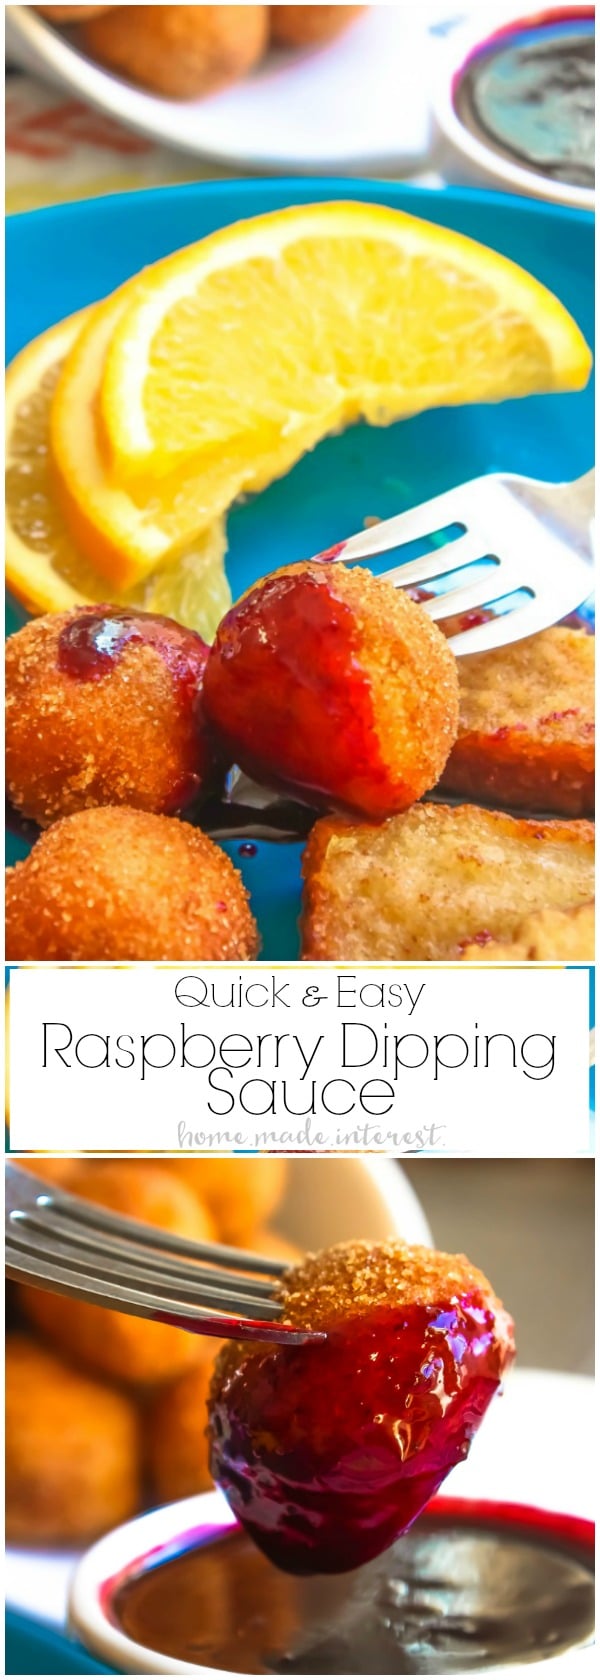 Making time for breakfast can be hard but I have a few tips and tricks for getting breakfast on the table in the morning before getting the kids off to school. This quick and easy raspberry dipping sauce can be frozen in individual portions and heated up to dip french toast sticks or donuts in for a breakfast the kids will love. 